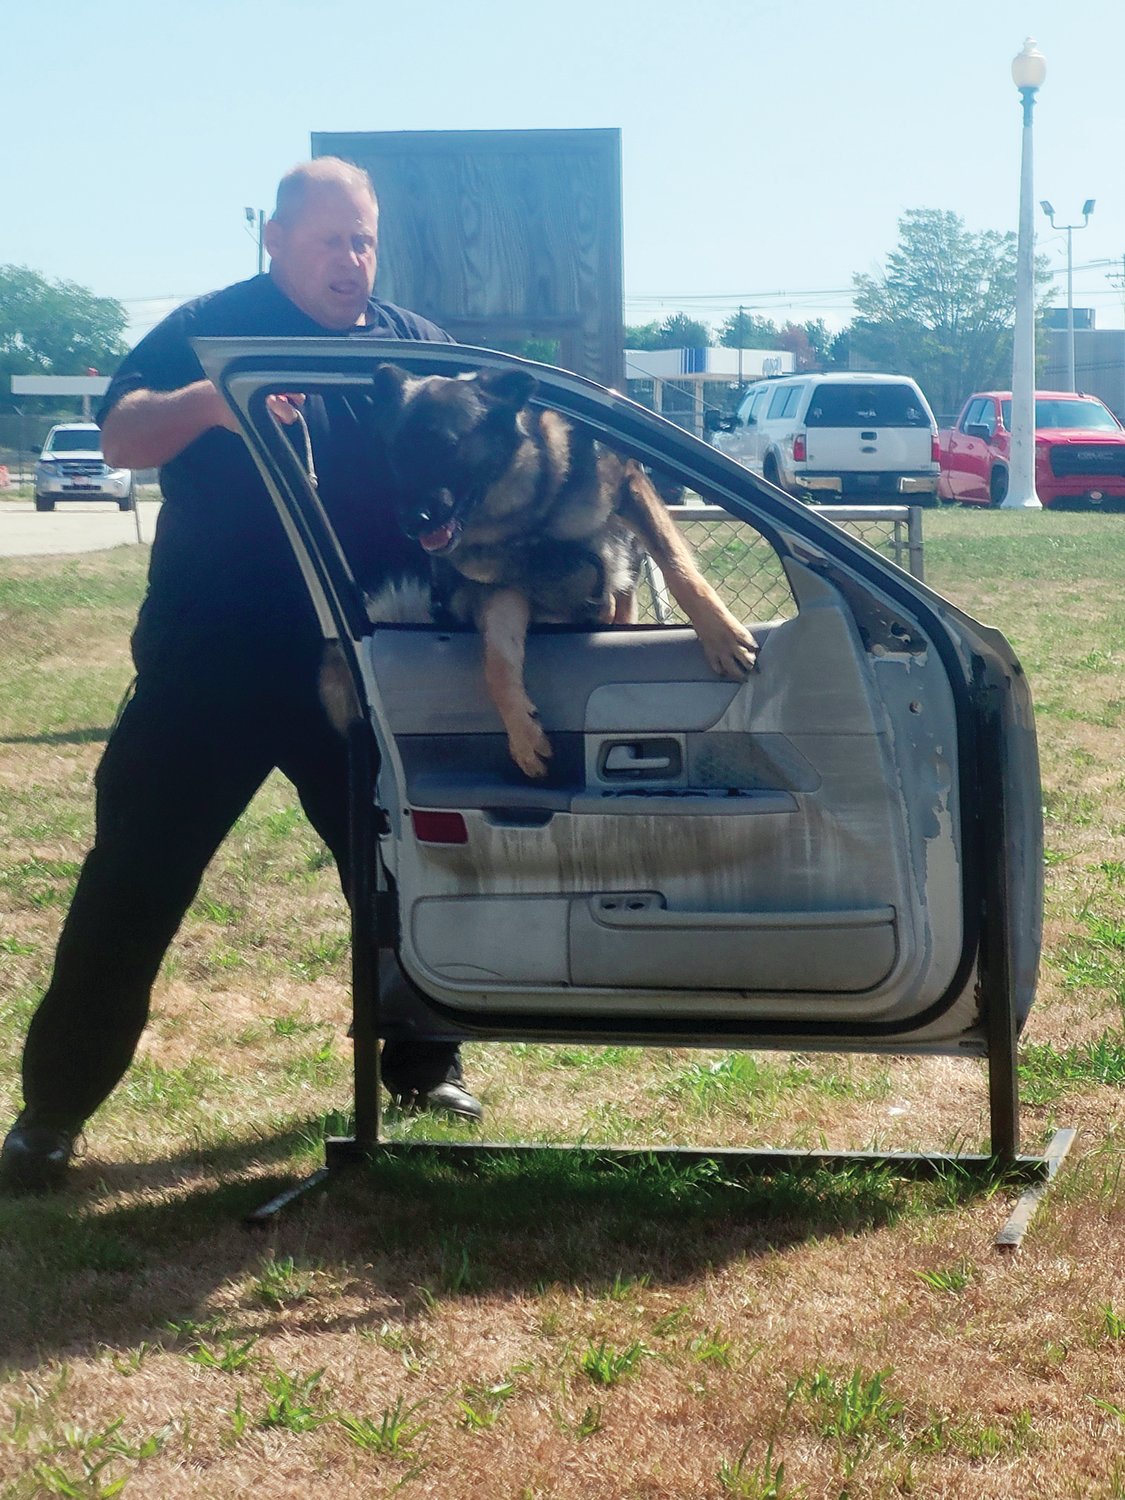 TRAFFIC STOP: Taz leaps through the open window of a car door on the K-9 training course. Dogs in police service face seriously strenuous training that ultimately takes a toll on their bodies. Taz has been training for duty since he was just a few months old.